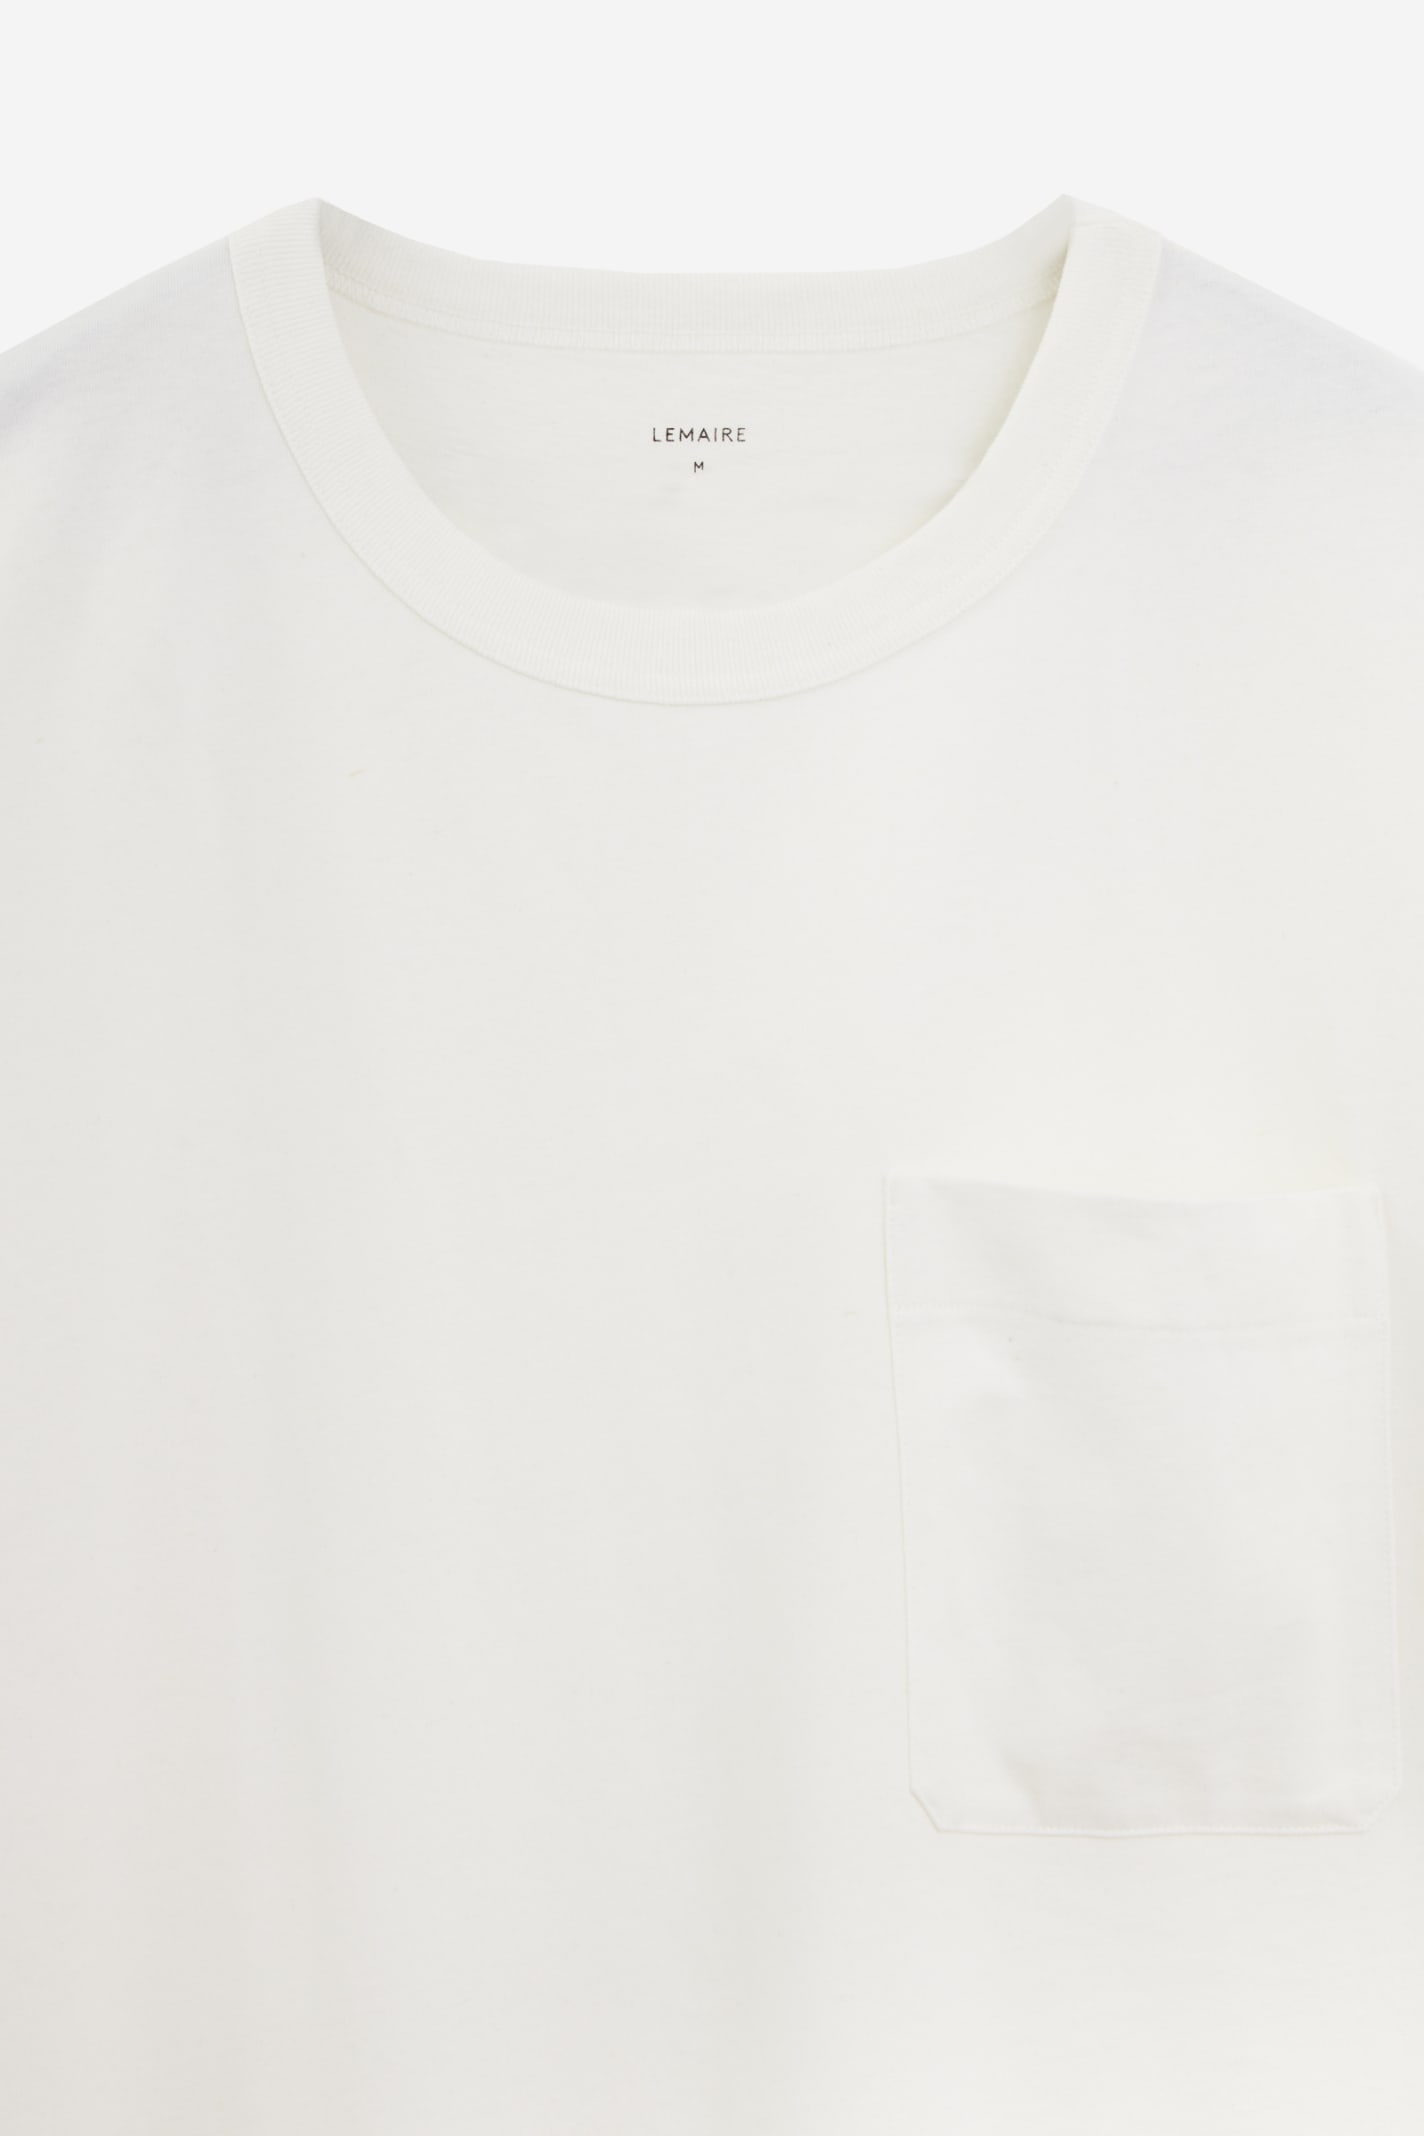 Shop Lemaire Boxy T-shirt T-shirt In White